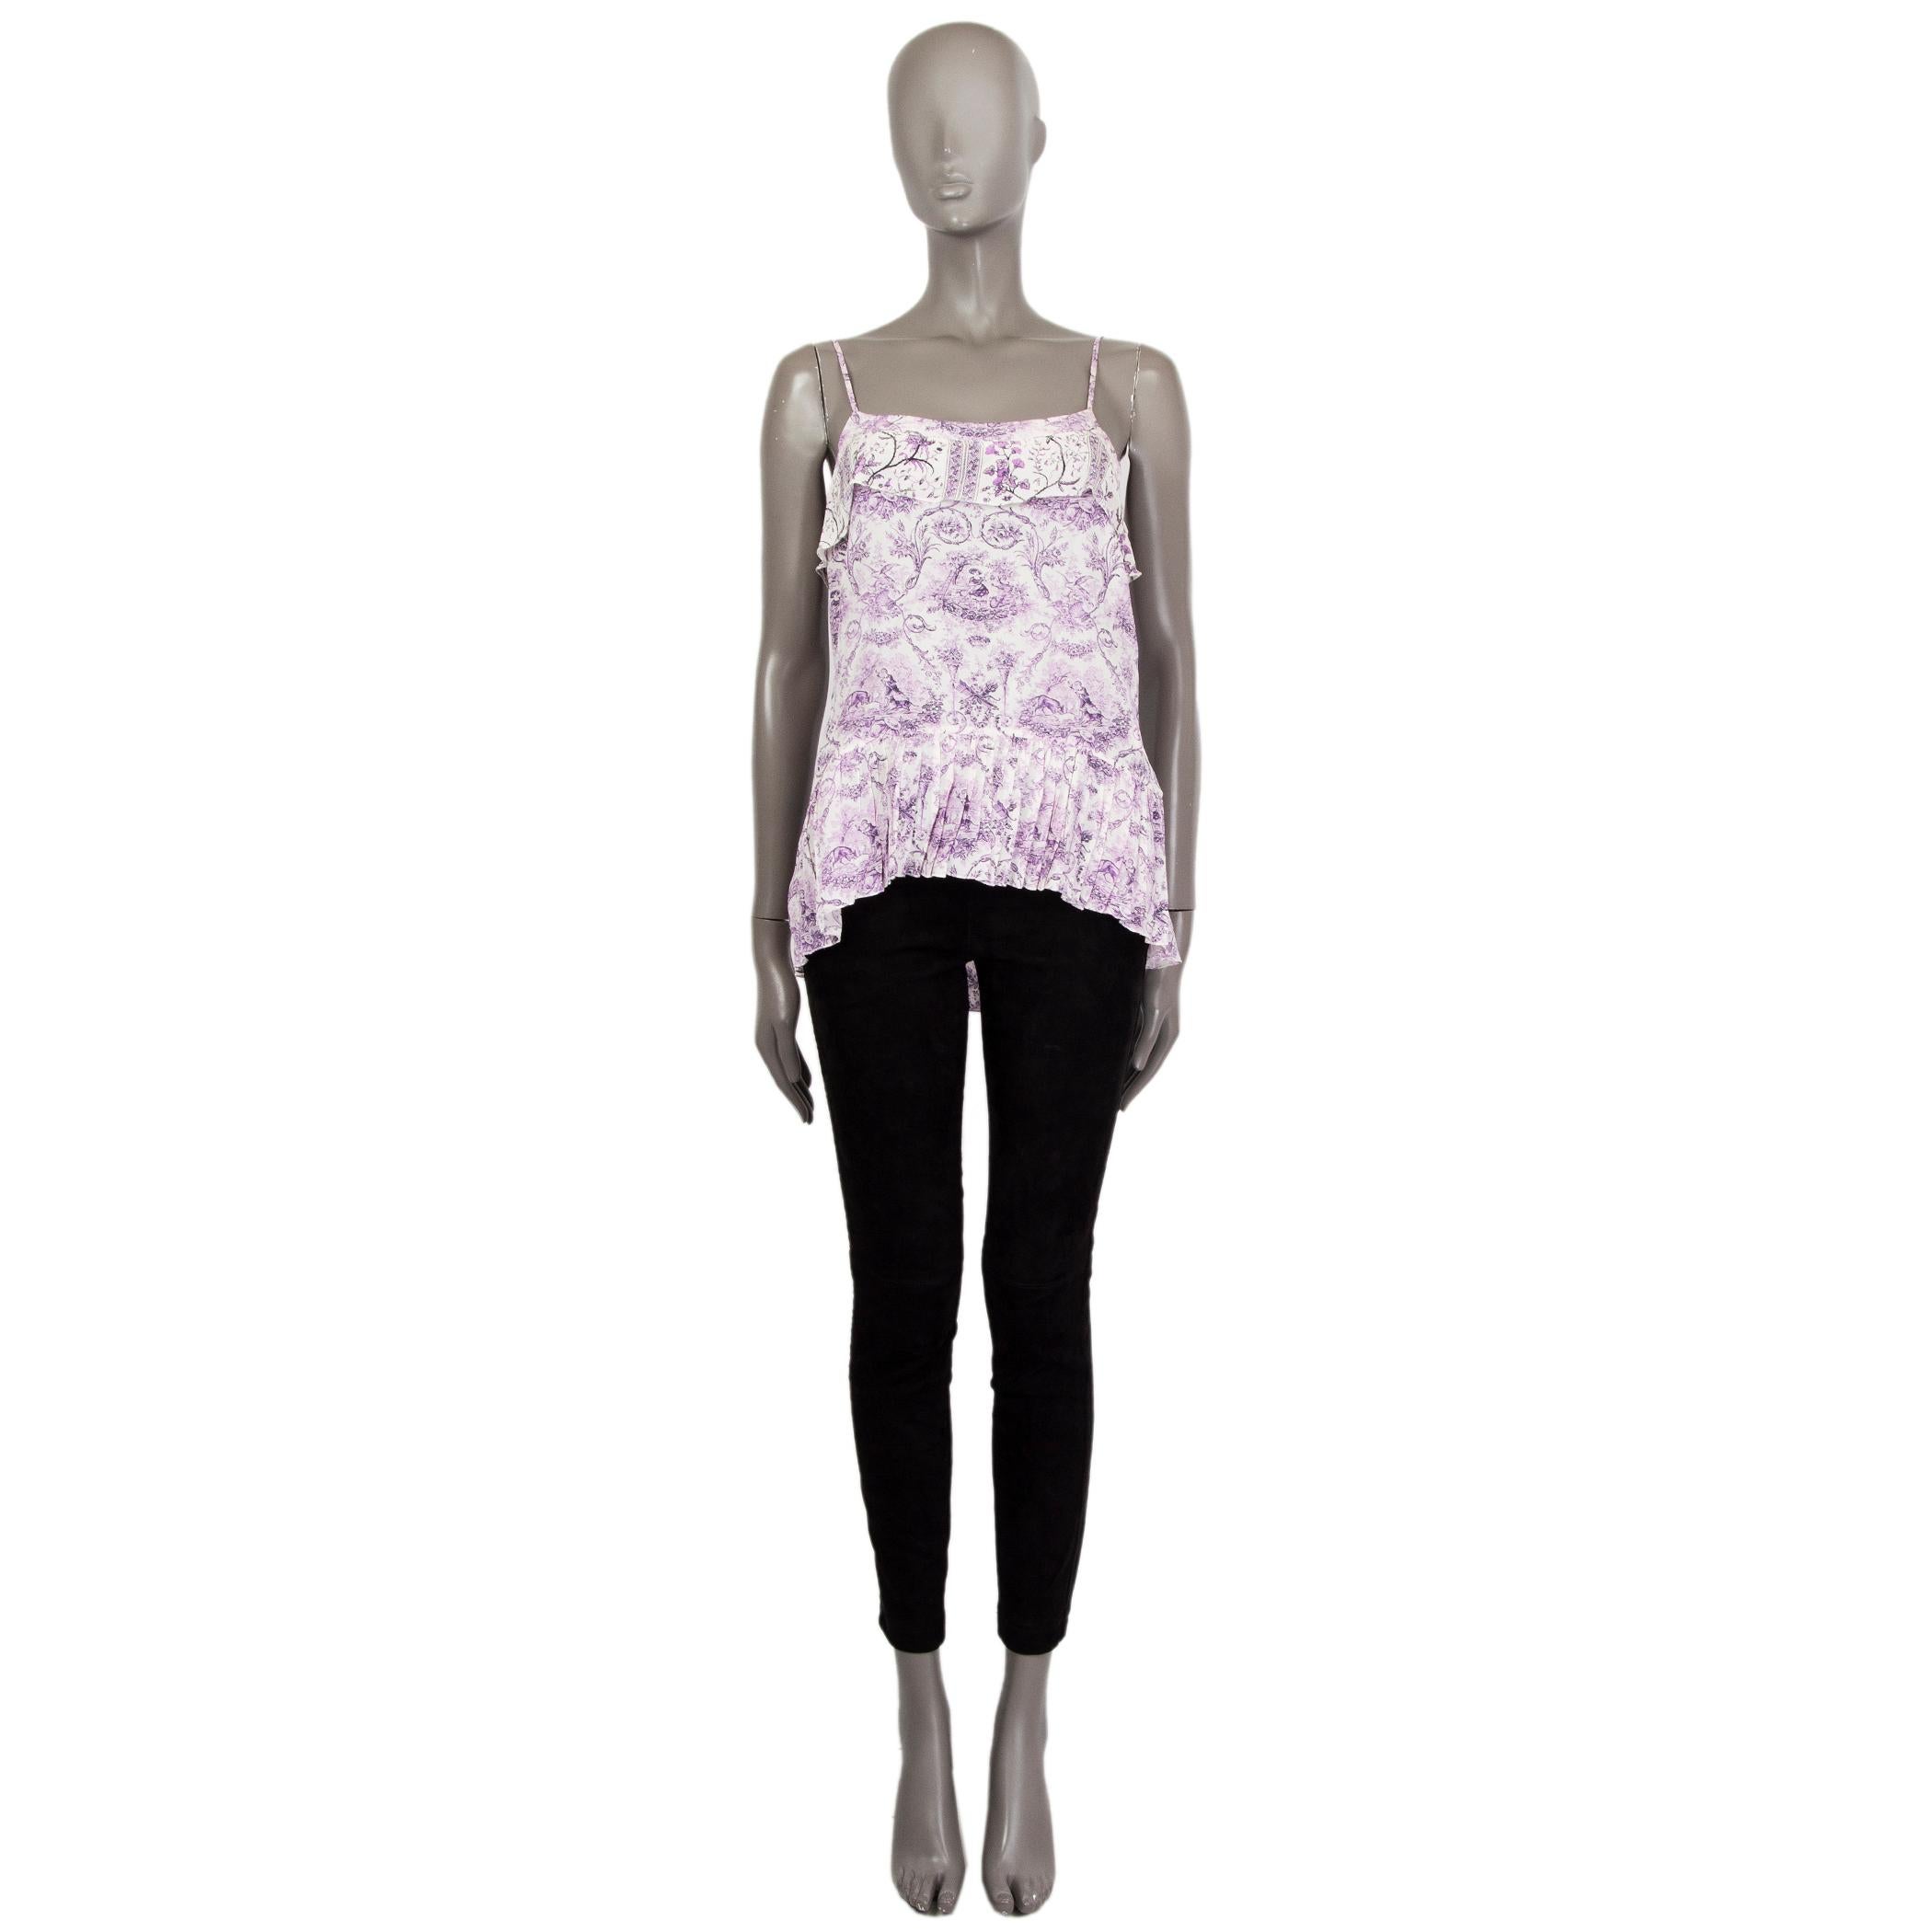 100% authentic Roberto Cavalli porcelain-print ruffled tank-top in white, purple and black silk (100%) with spaghetti straps. Closes with zipper on the side. Unlined. Has been worn and is in excellent condition. 

Measurements
Tag